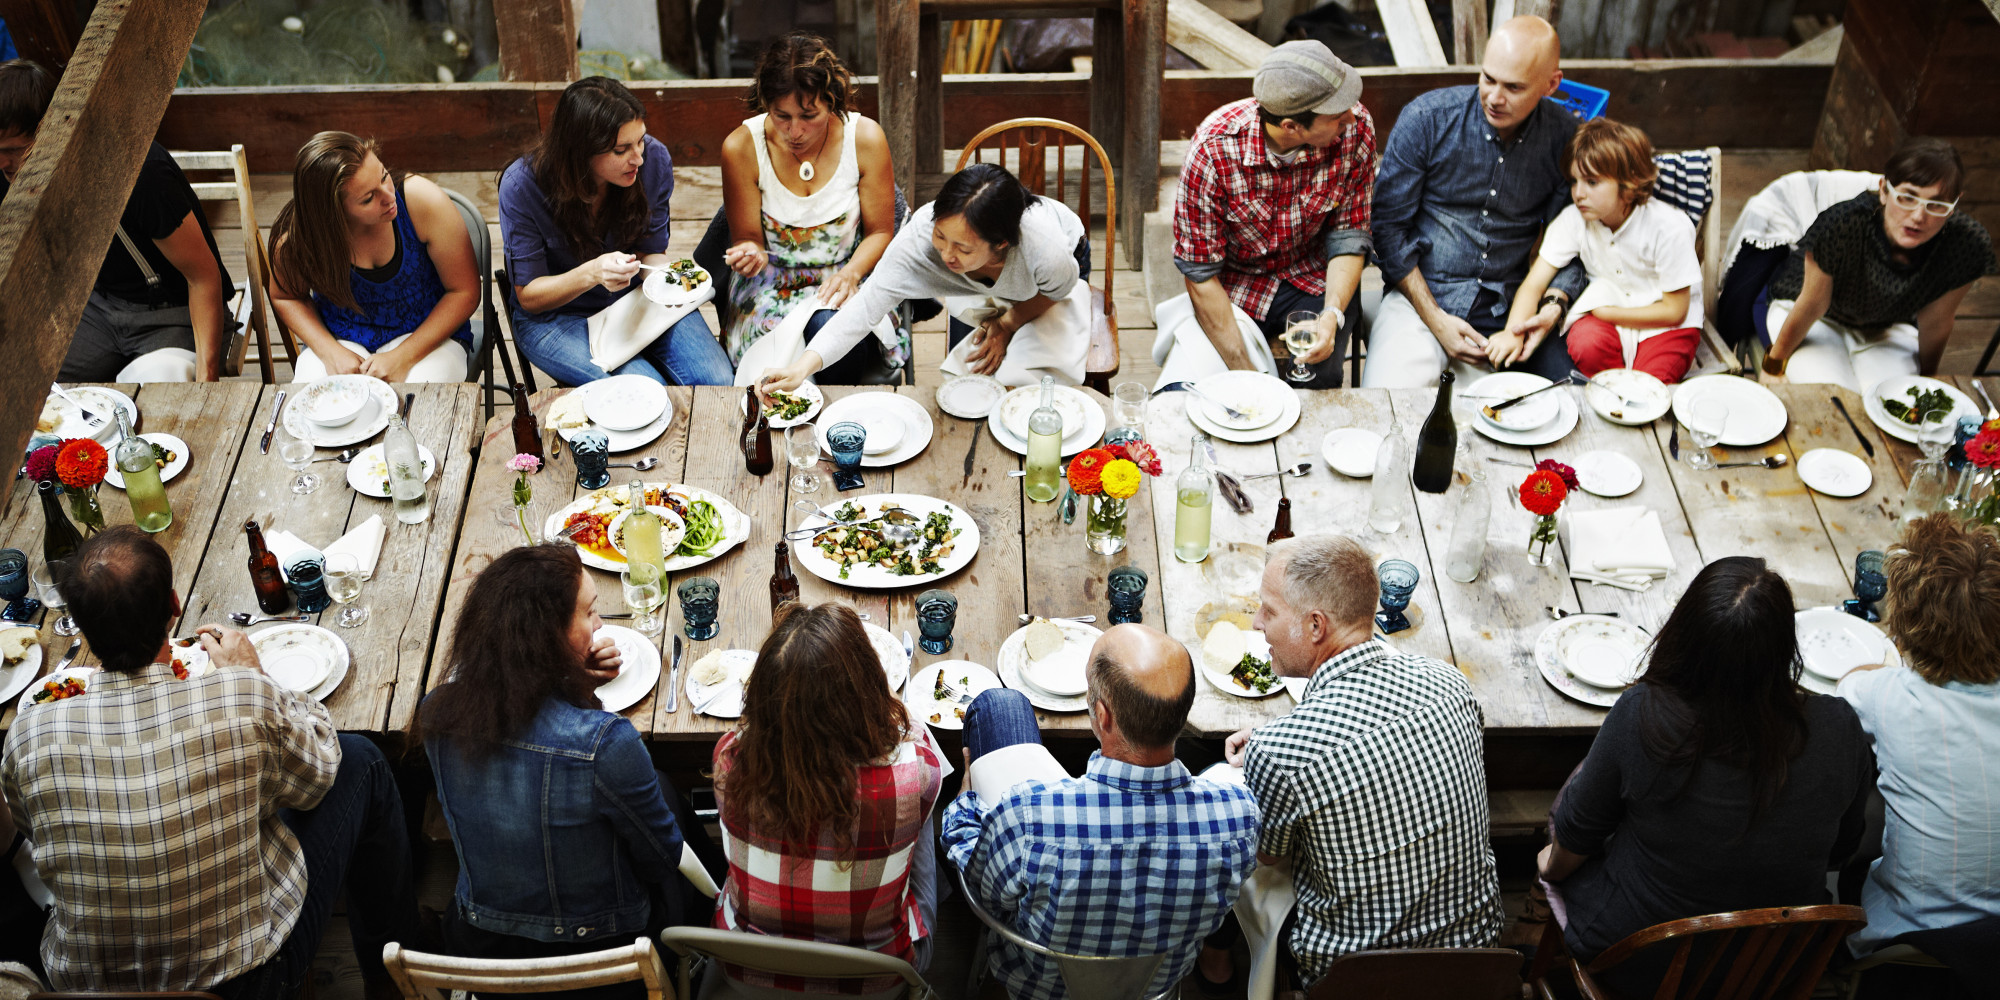 9 People Who Will Throw A Wrench In Your Dinner Party